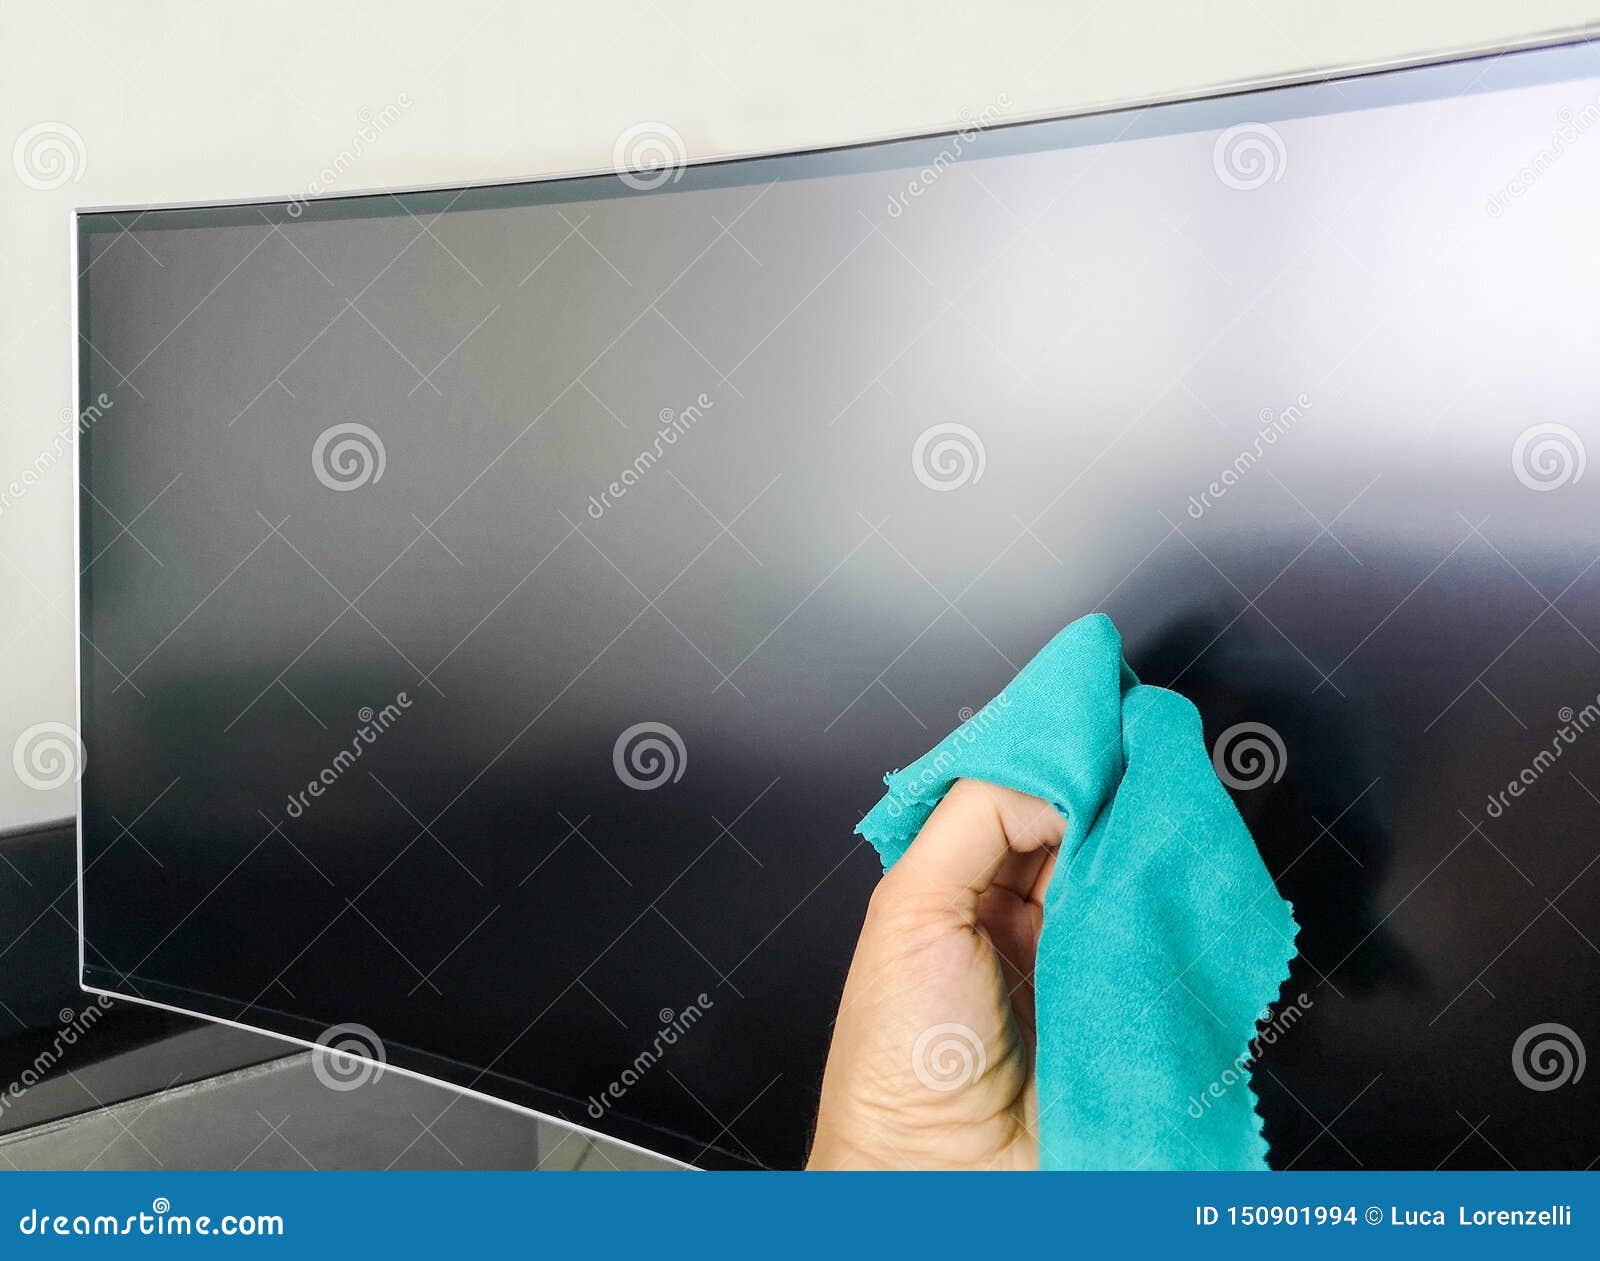 cleaning pc monitor hand hold rag